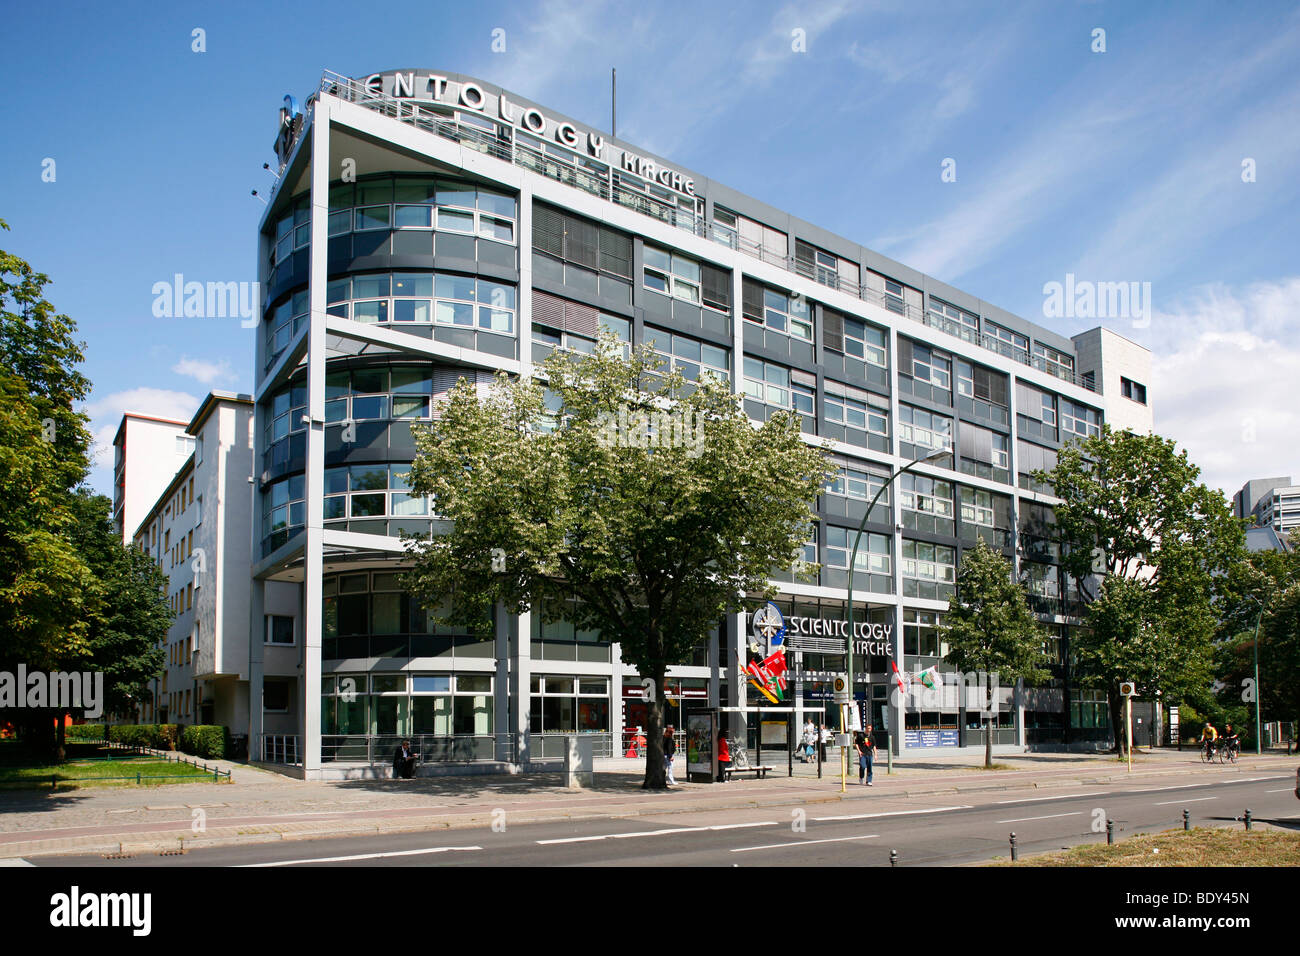 Scientology headquarters, Otto-Suhr-Allee, Berlin, Germany, Europe Stock Photo